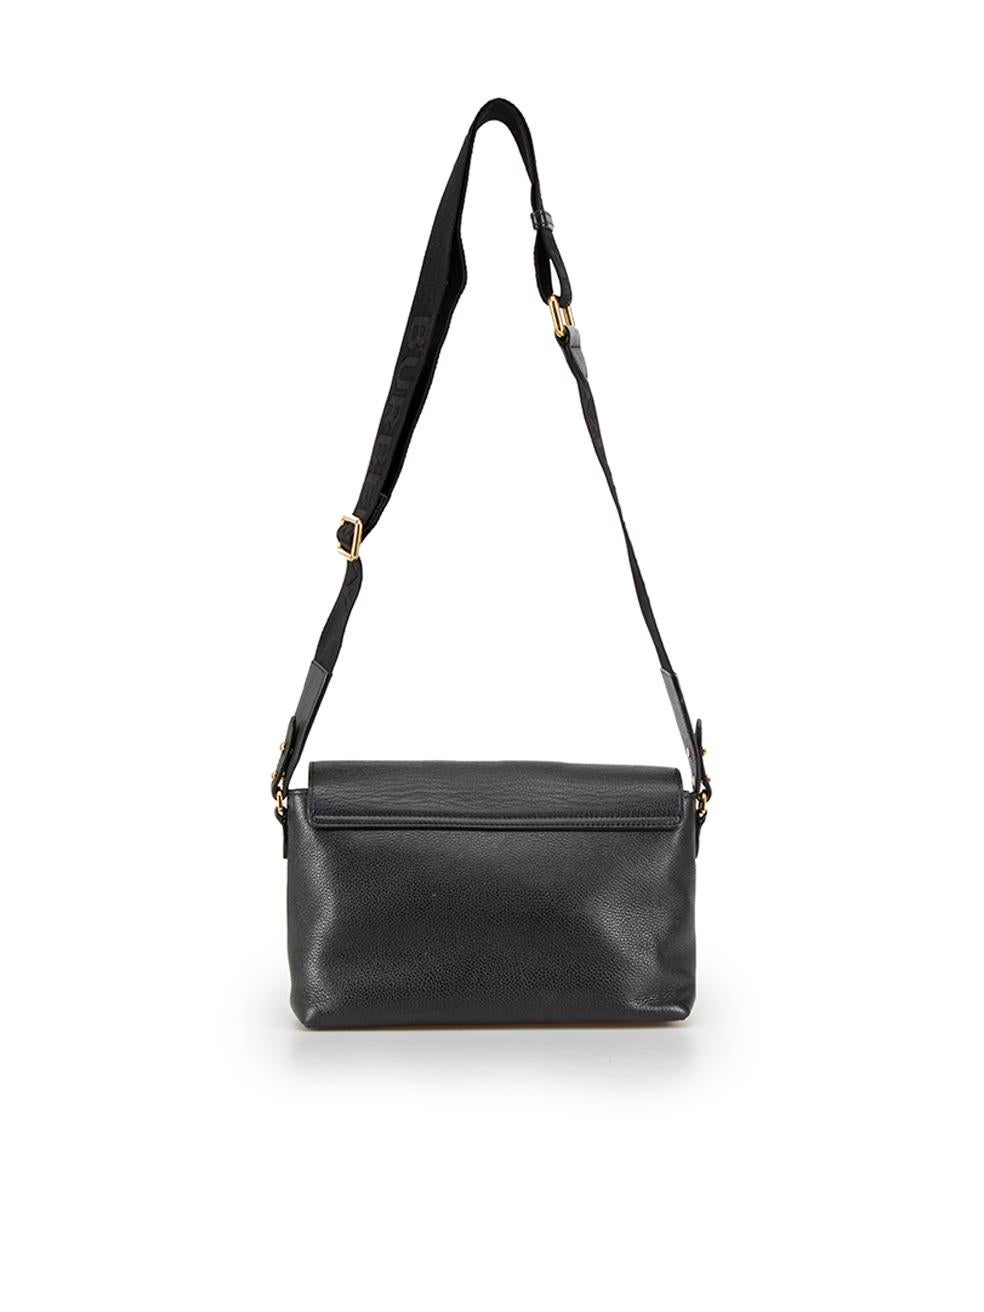 Burberry Black Leather Note Crossbody Bag In Good Condition For Sale In London, GB